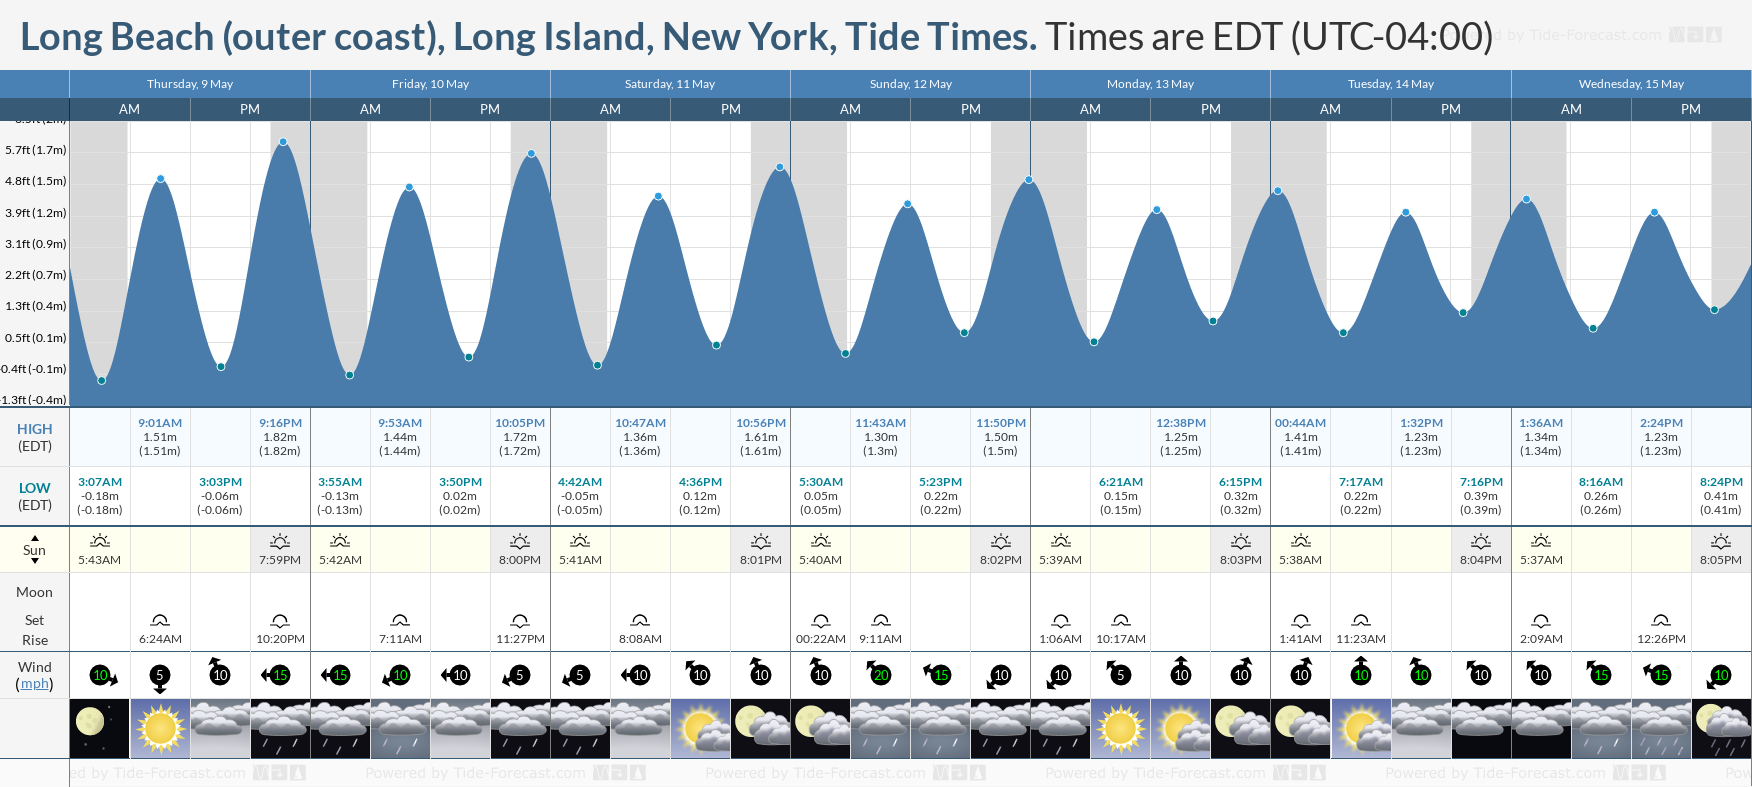 Long Beach (outer coast), Long Island, New York Tide Chart including high and low tide times for the next 7 days